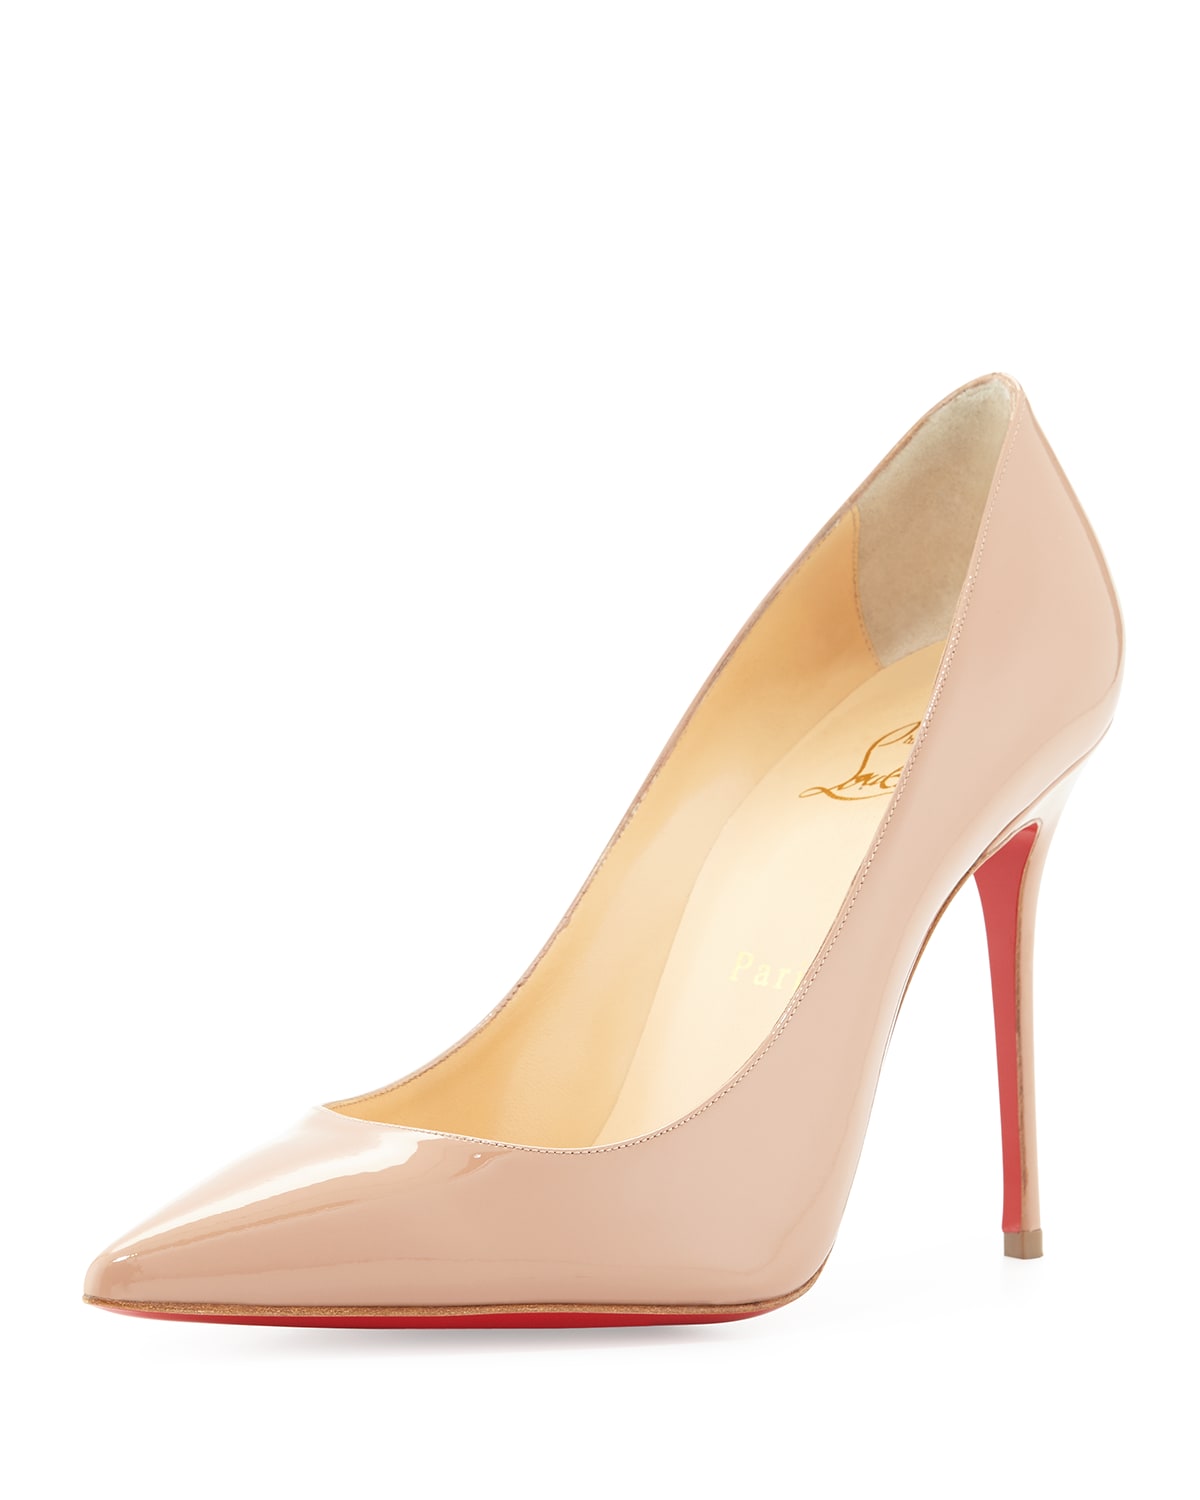 Christian Louboutin Decollette Pointed-Toe Red Sole Pumps